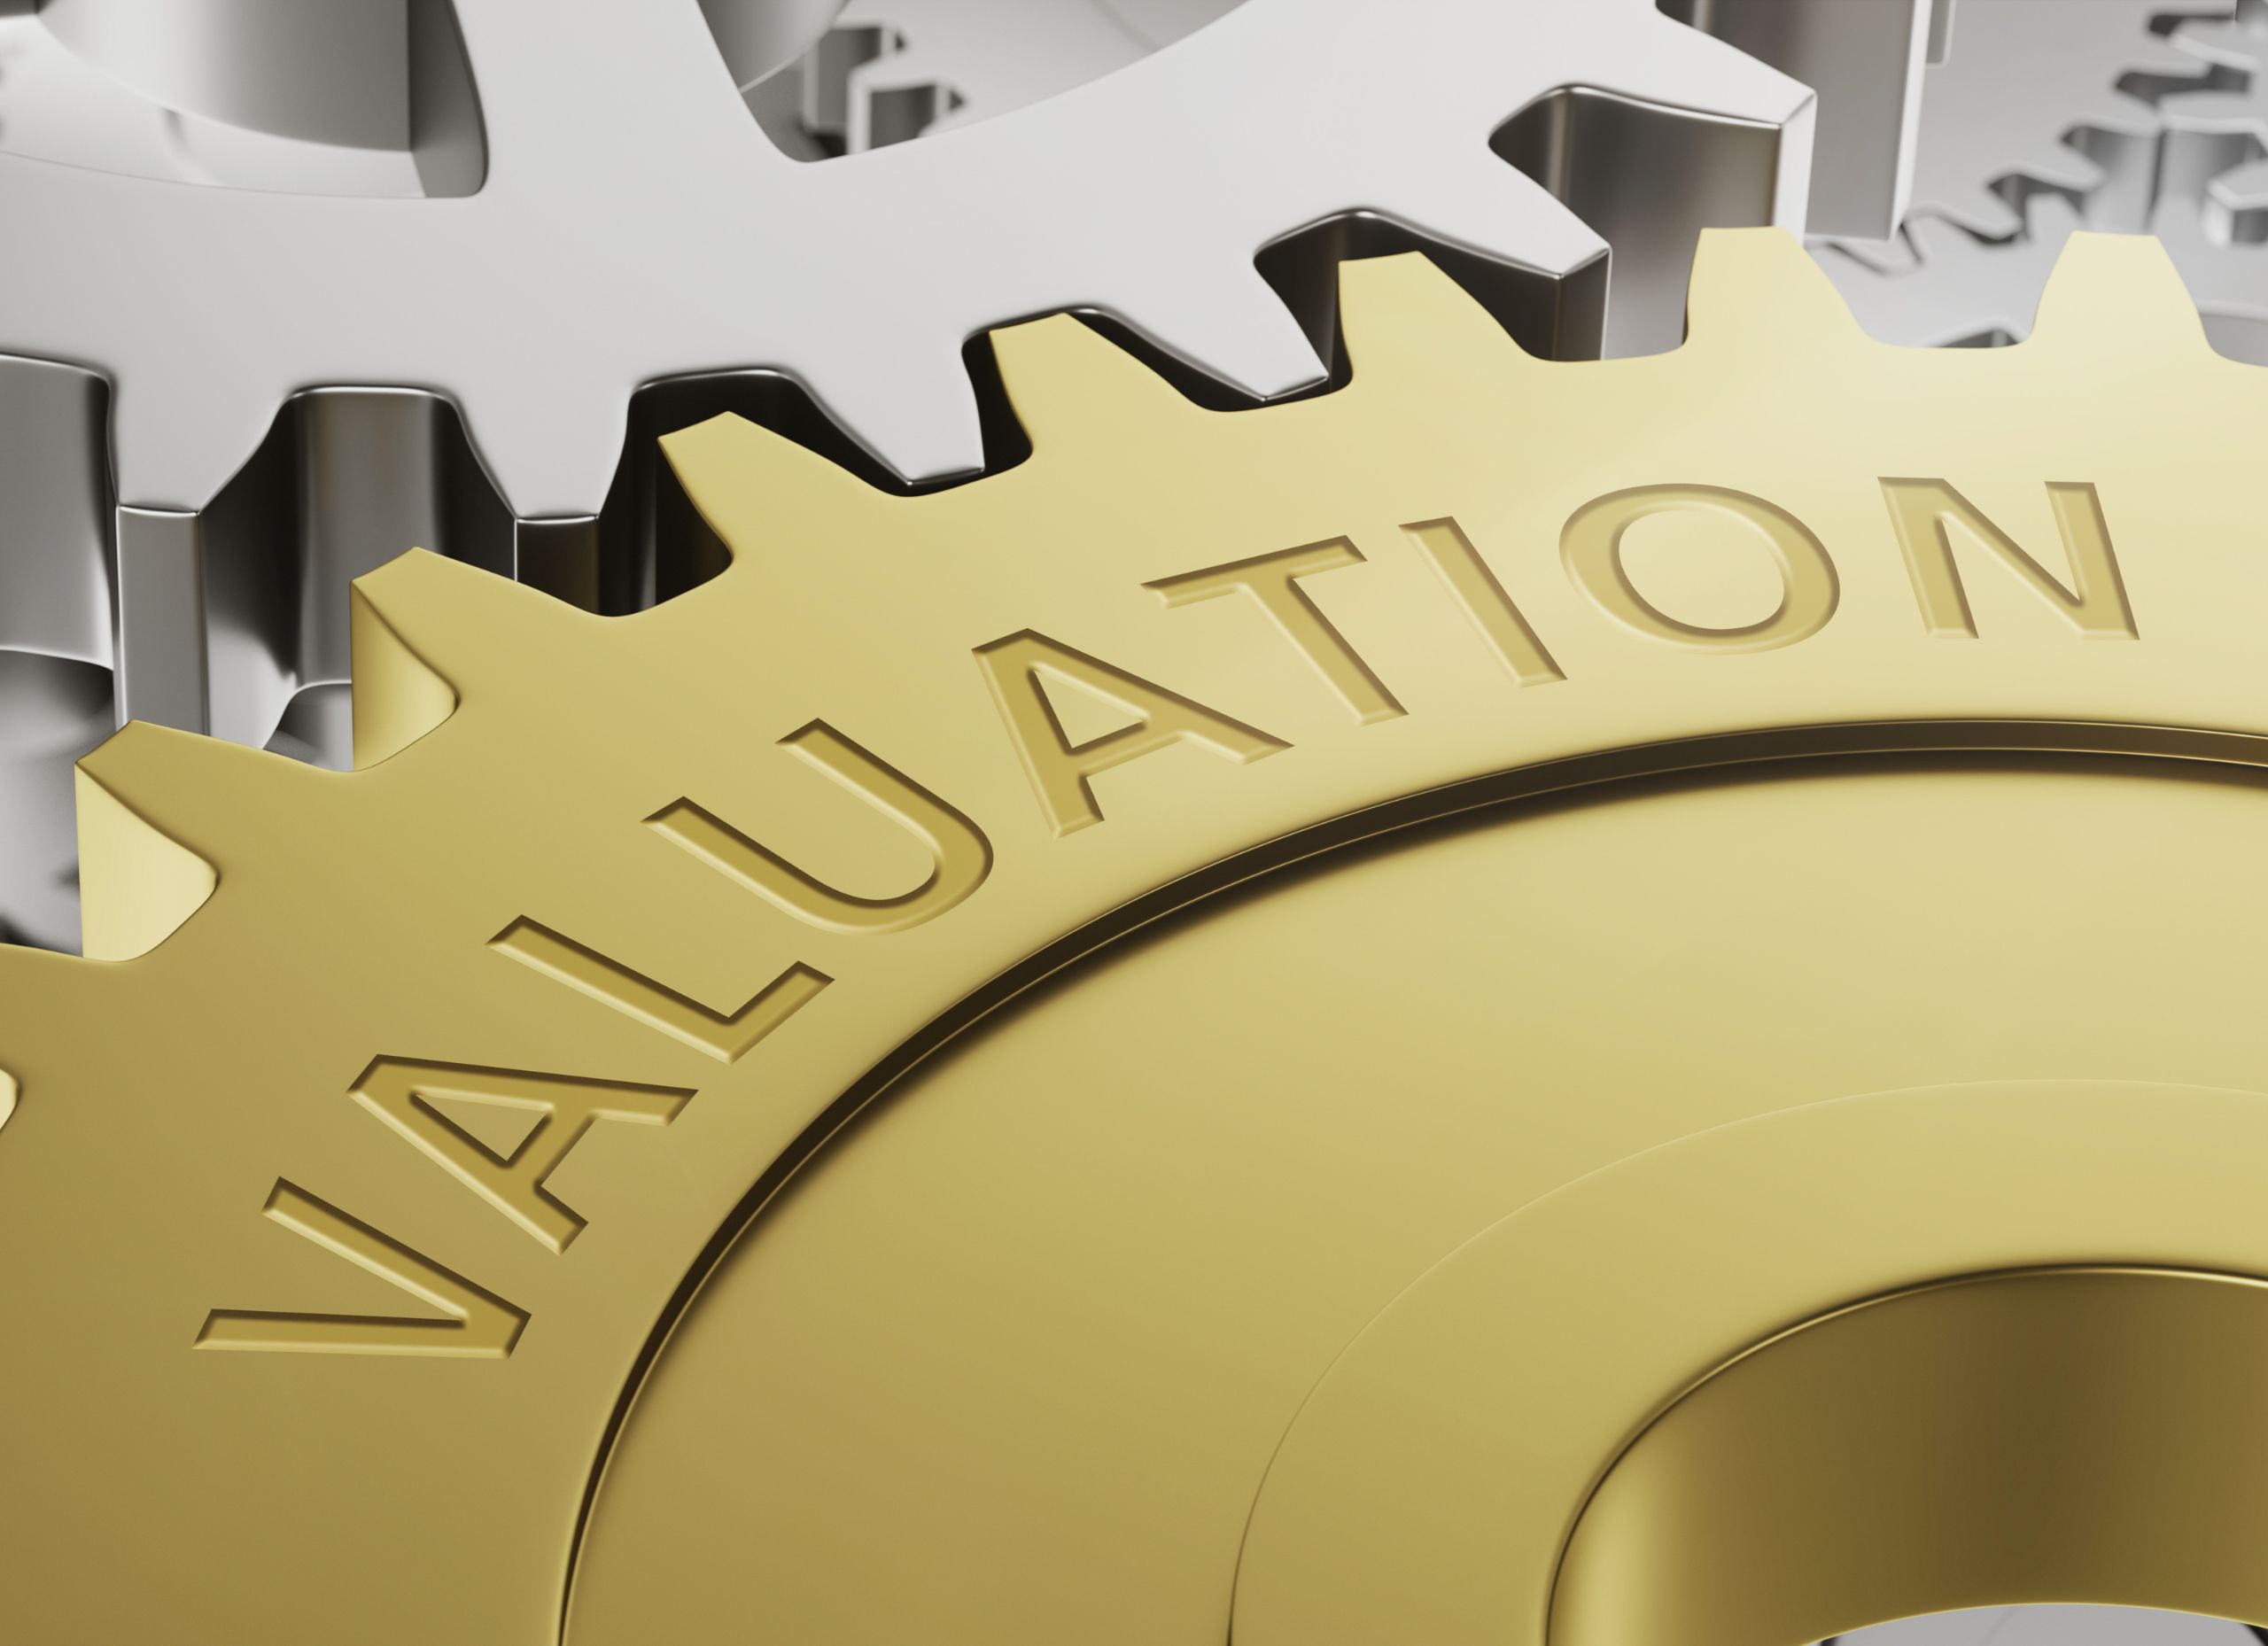 Business valuations